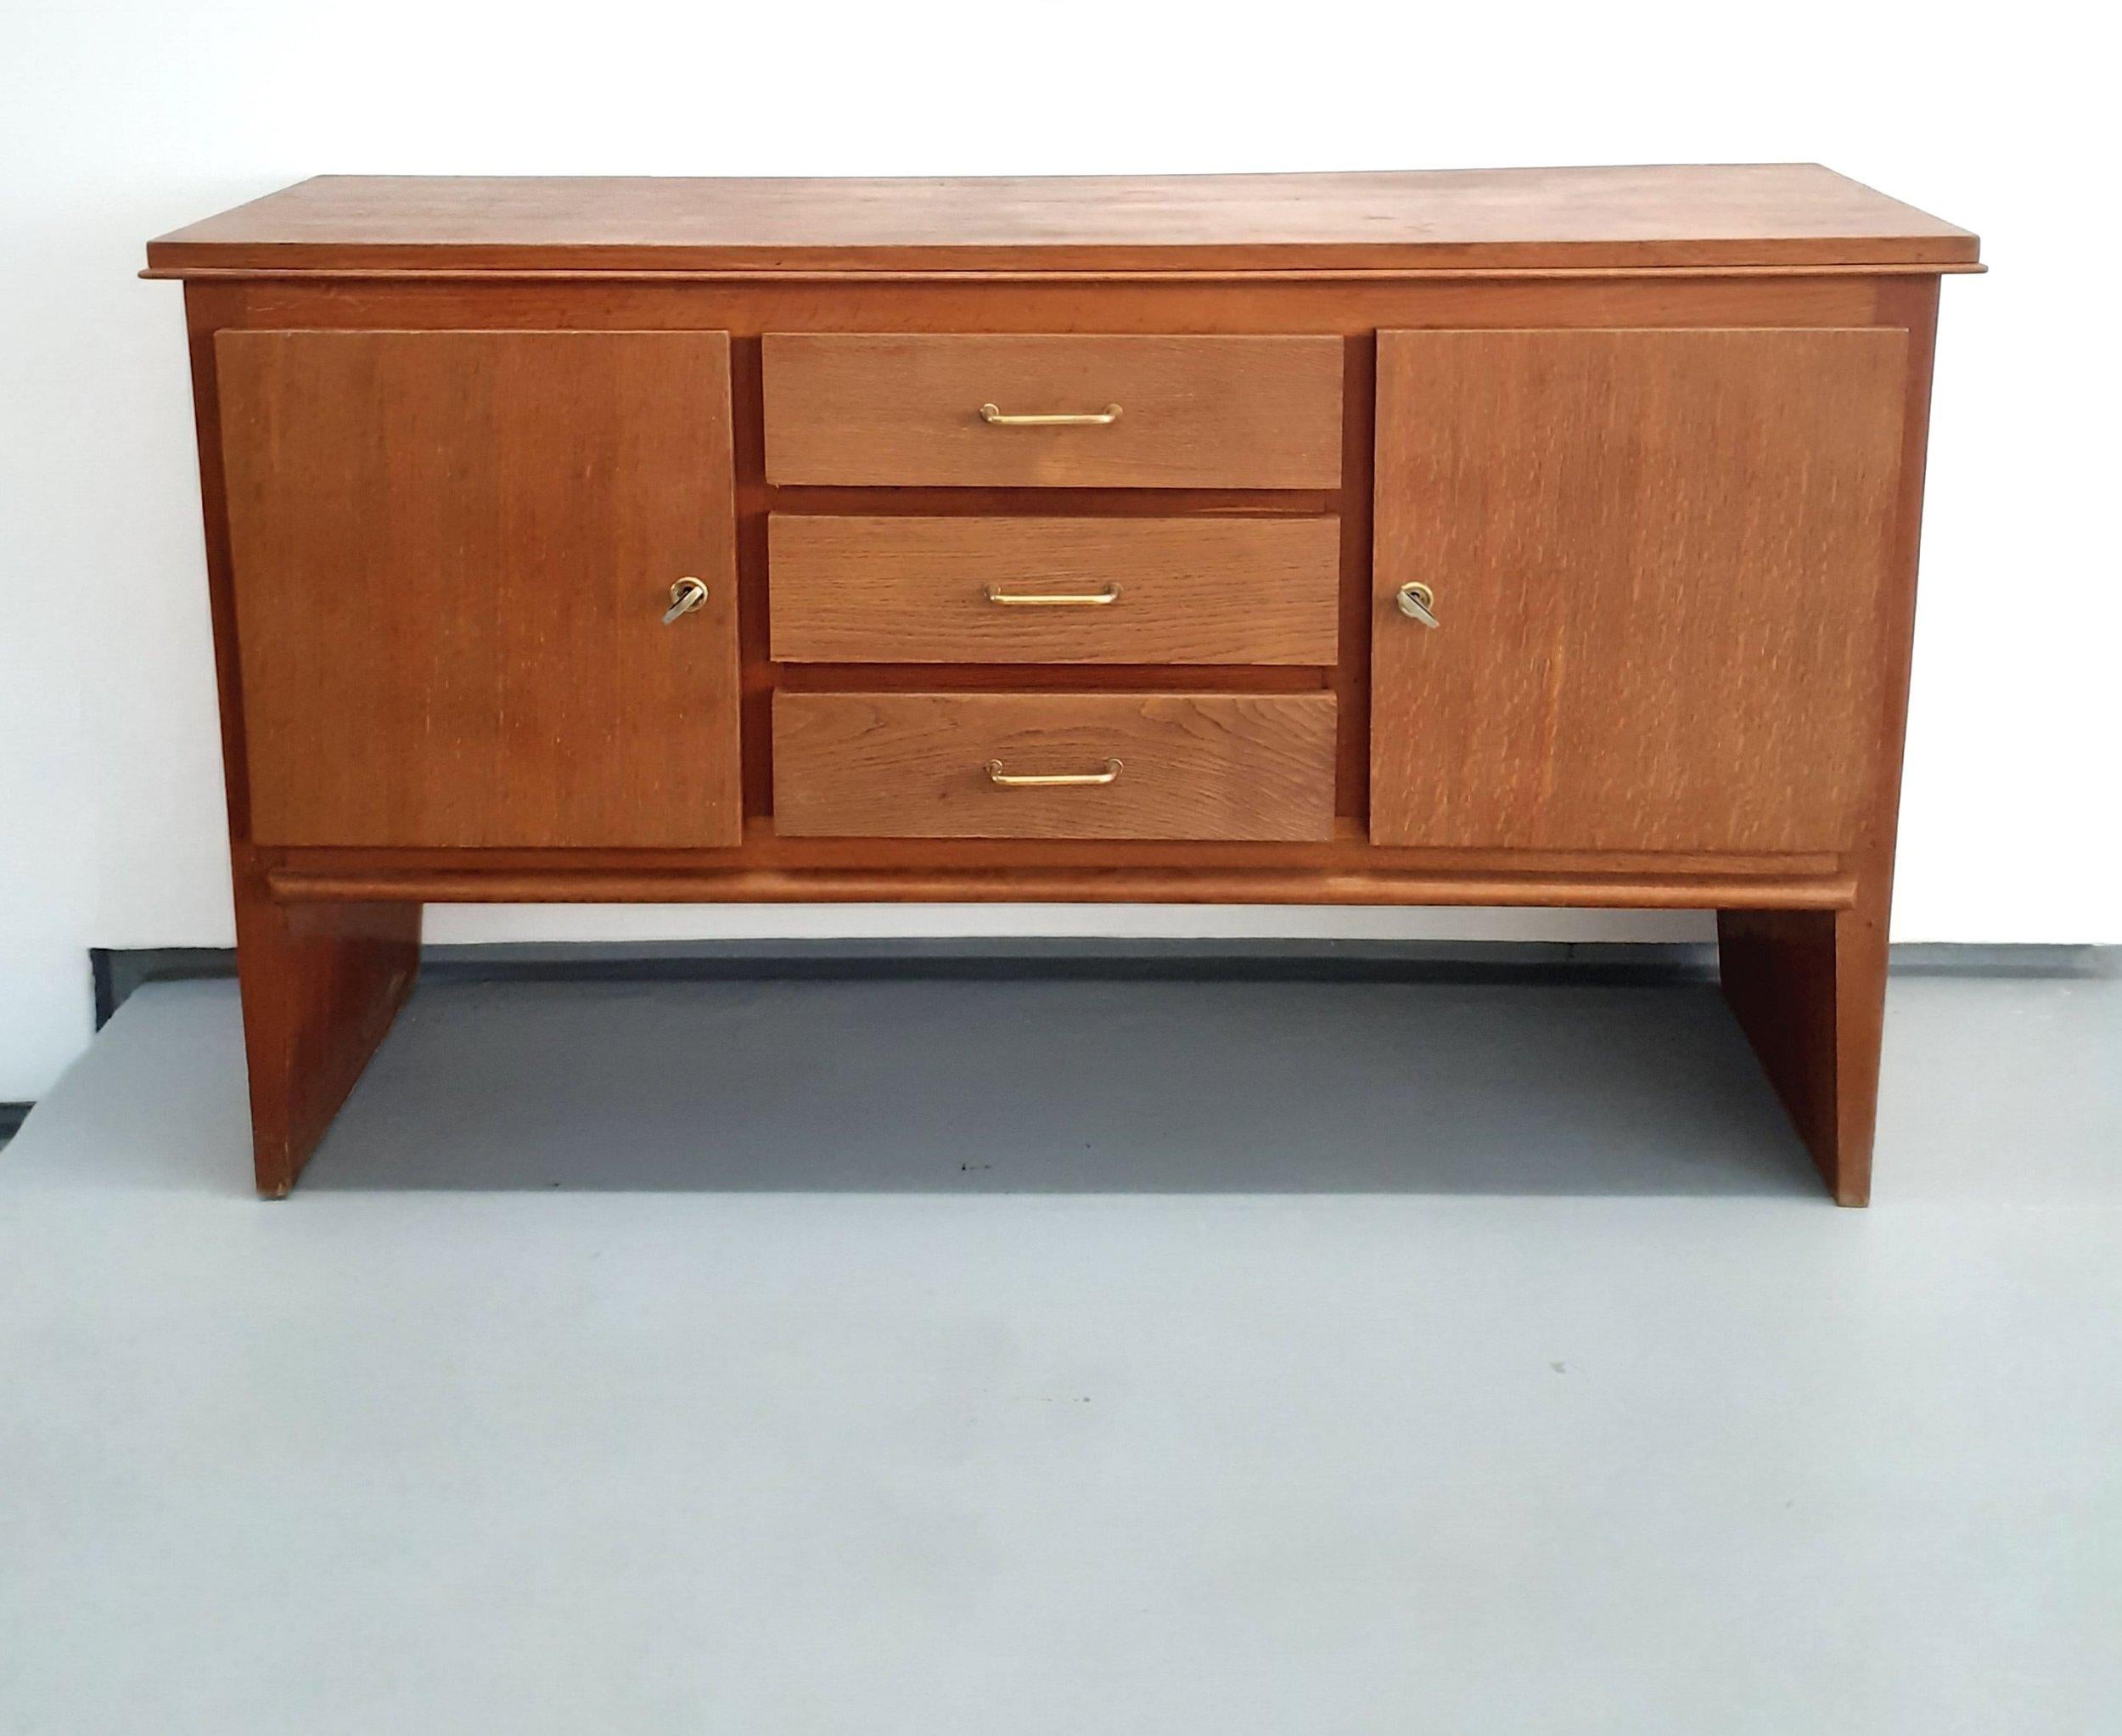 Oak buffet with 2 Doors and 3 Drawers by René Gabriel, 1940s

René Gabriel (1899 - 1950) is a precursor of French industrial design. He was one of the first to create, as early as the 1930s, economical mass-produced furniture combining aestheticism,